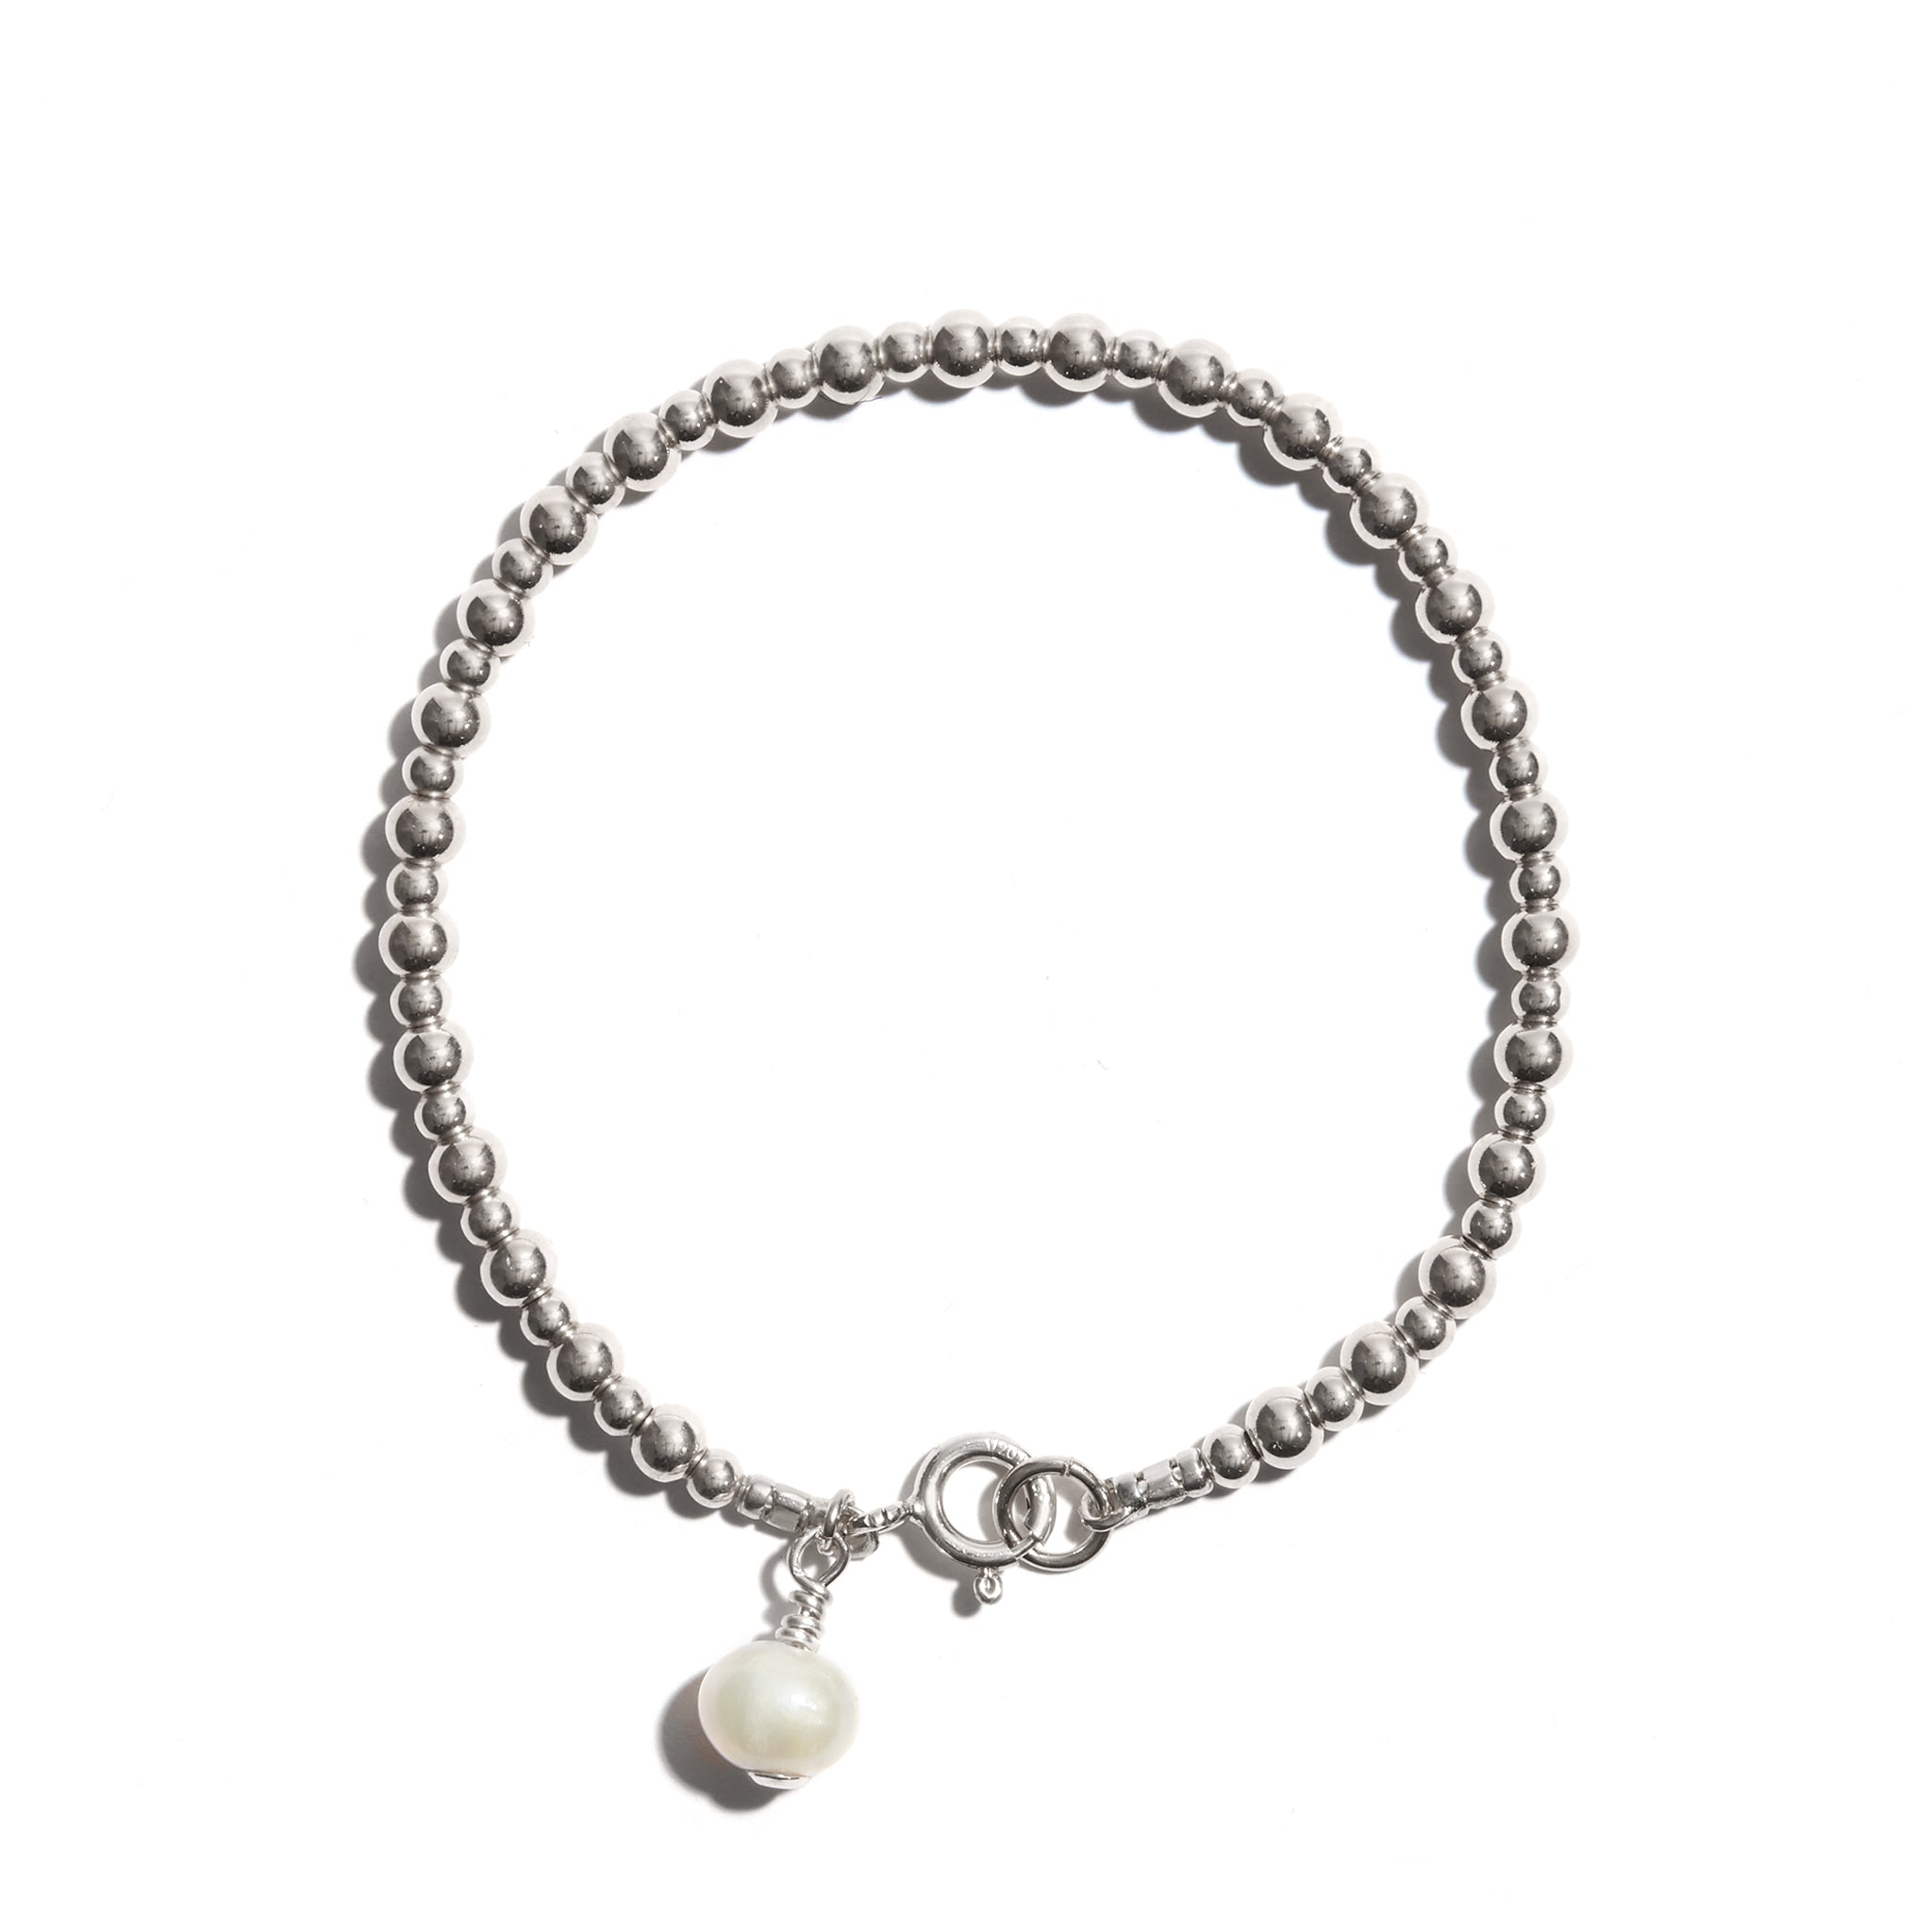 Photo of our Pearl Charm Stacking Bracelet features larger followed by smaller beads consecutively strung, and a single pearl charm at the clasp to add just a little extra bit of elegance.